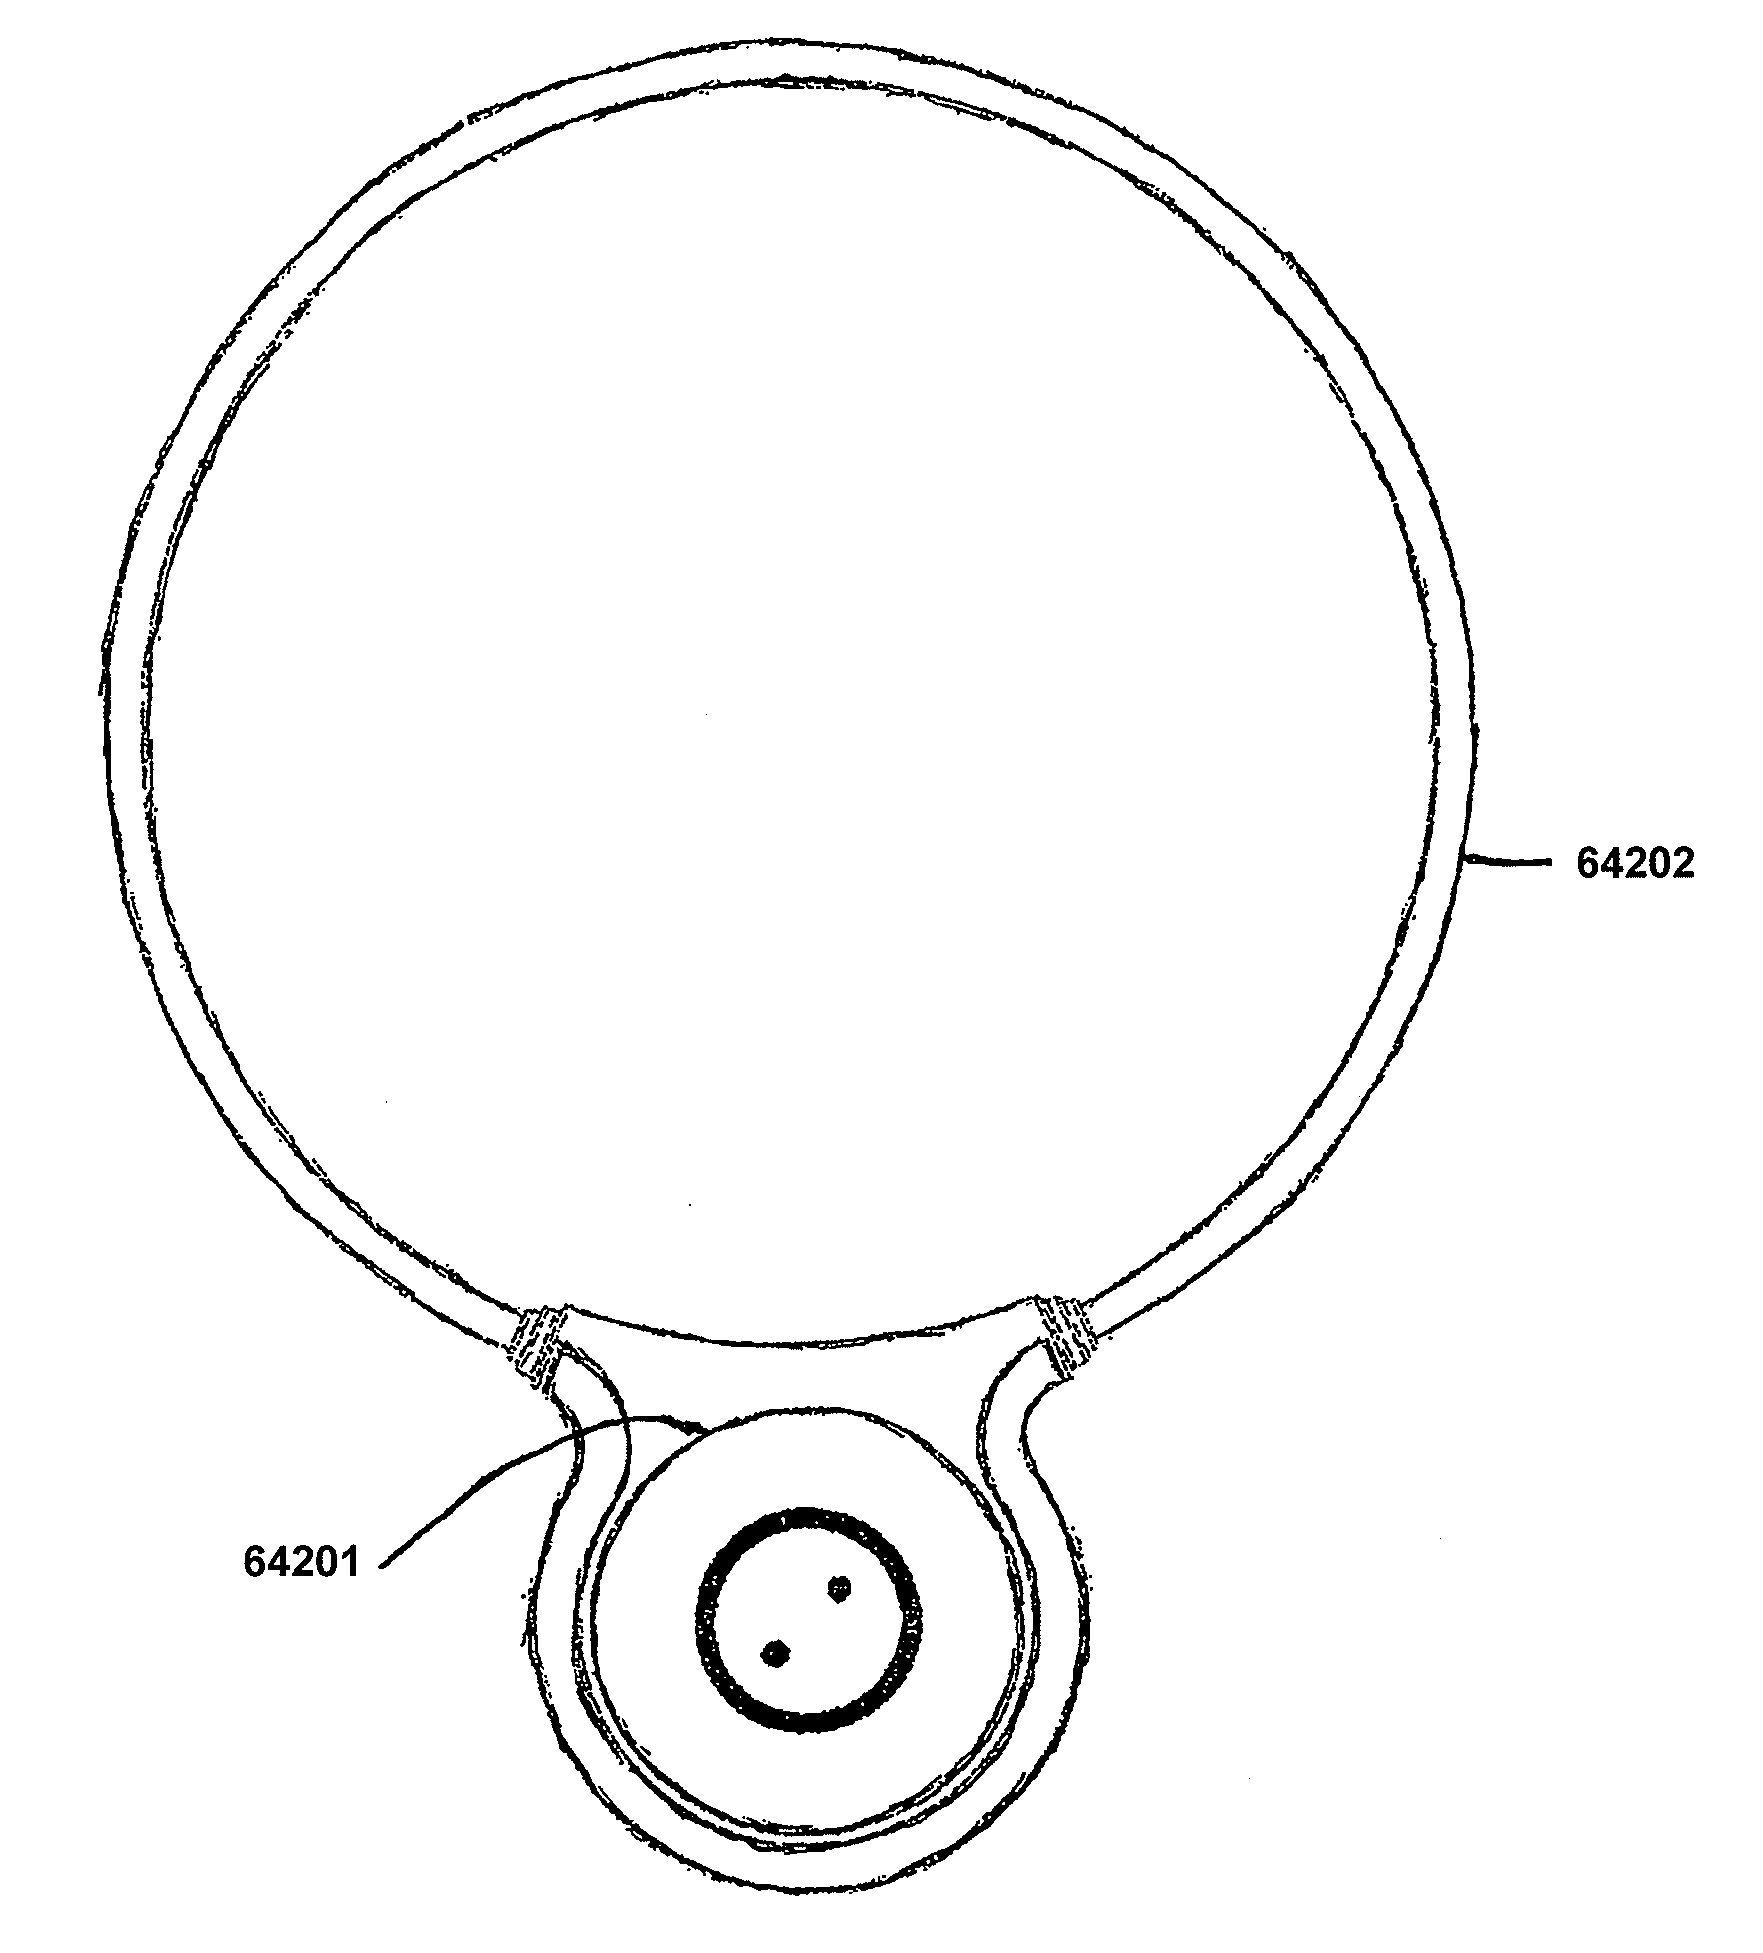 Apparatus and method for electromagnetic treatment